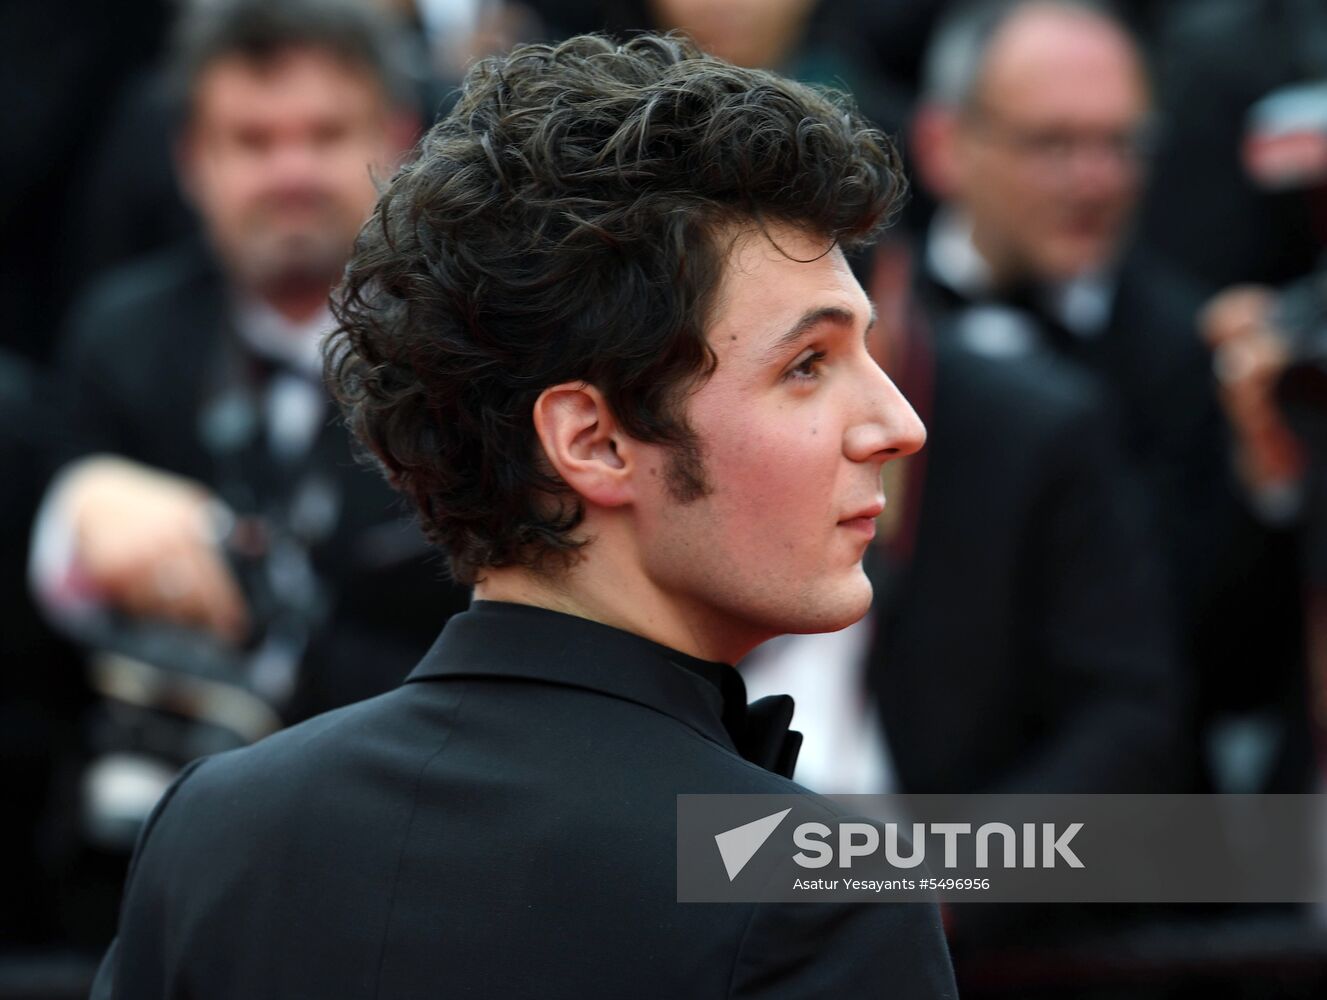 71st Cannes Film Festival. Day three